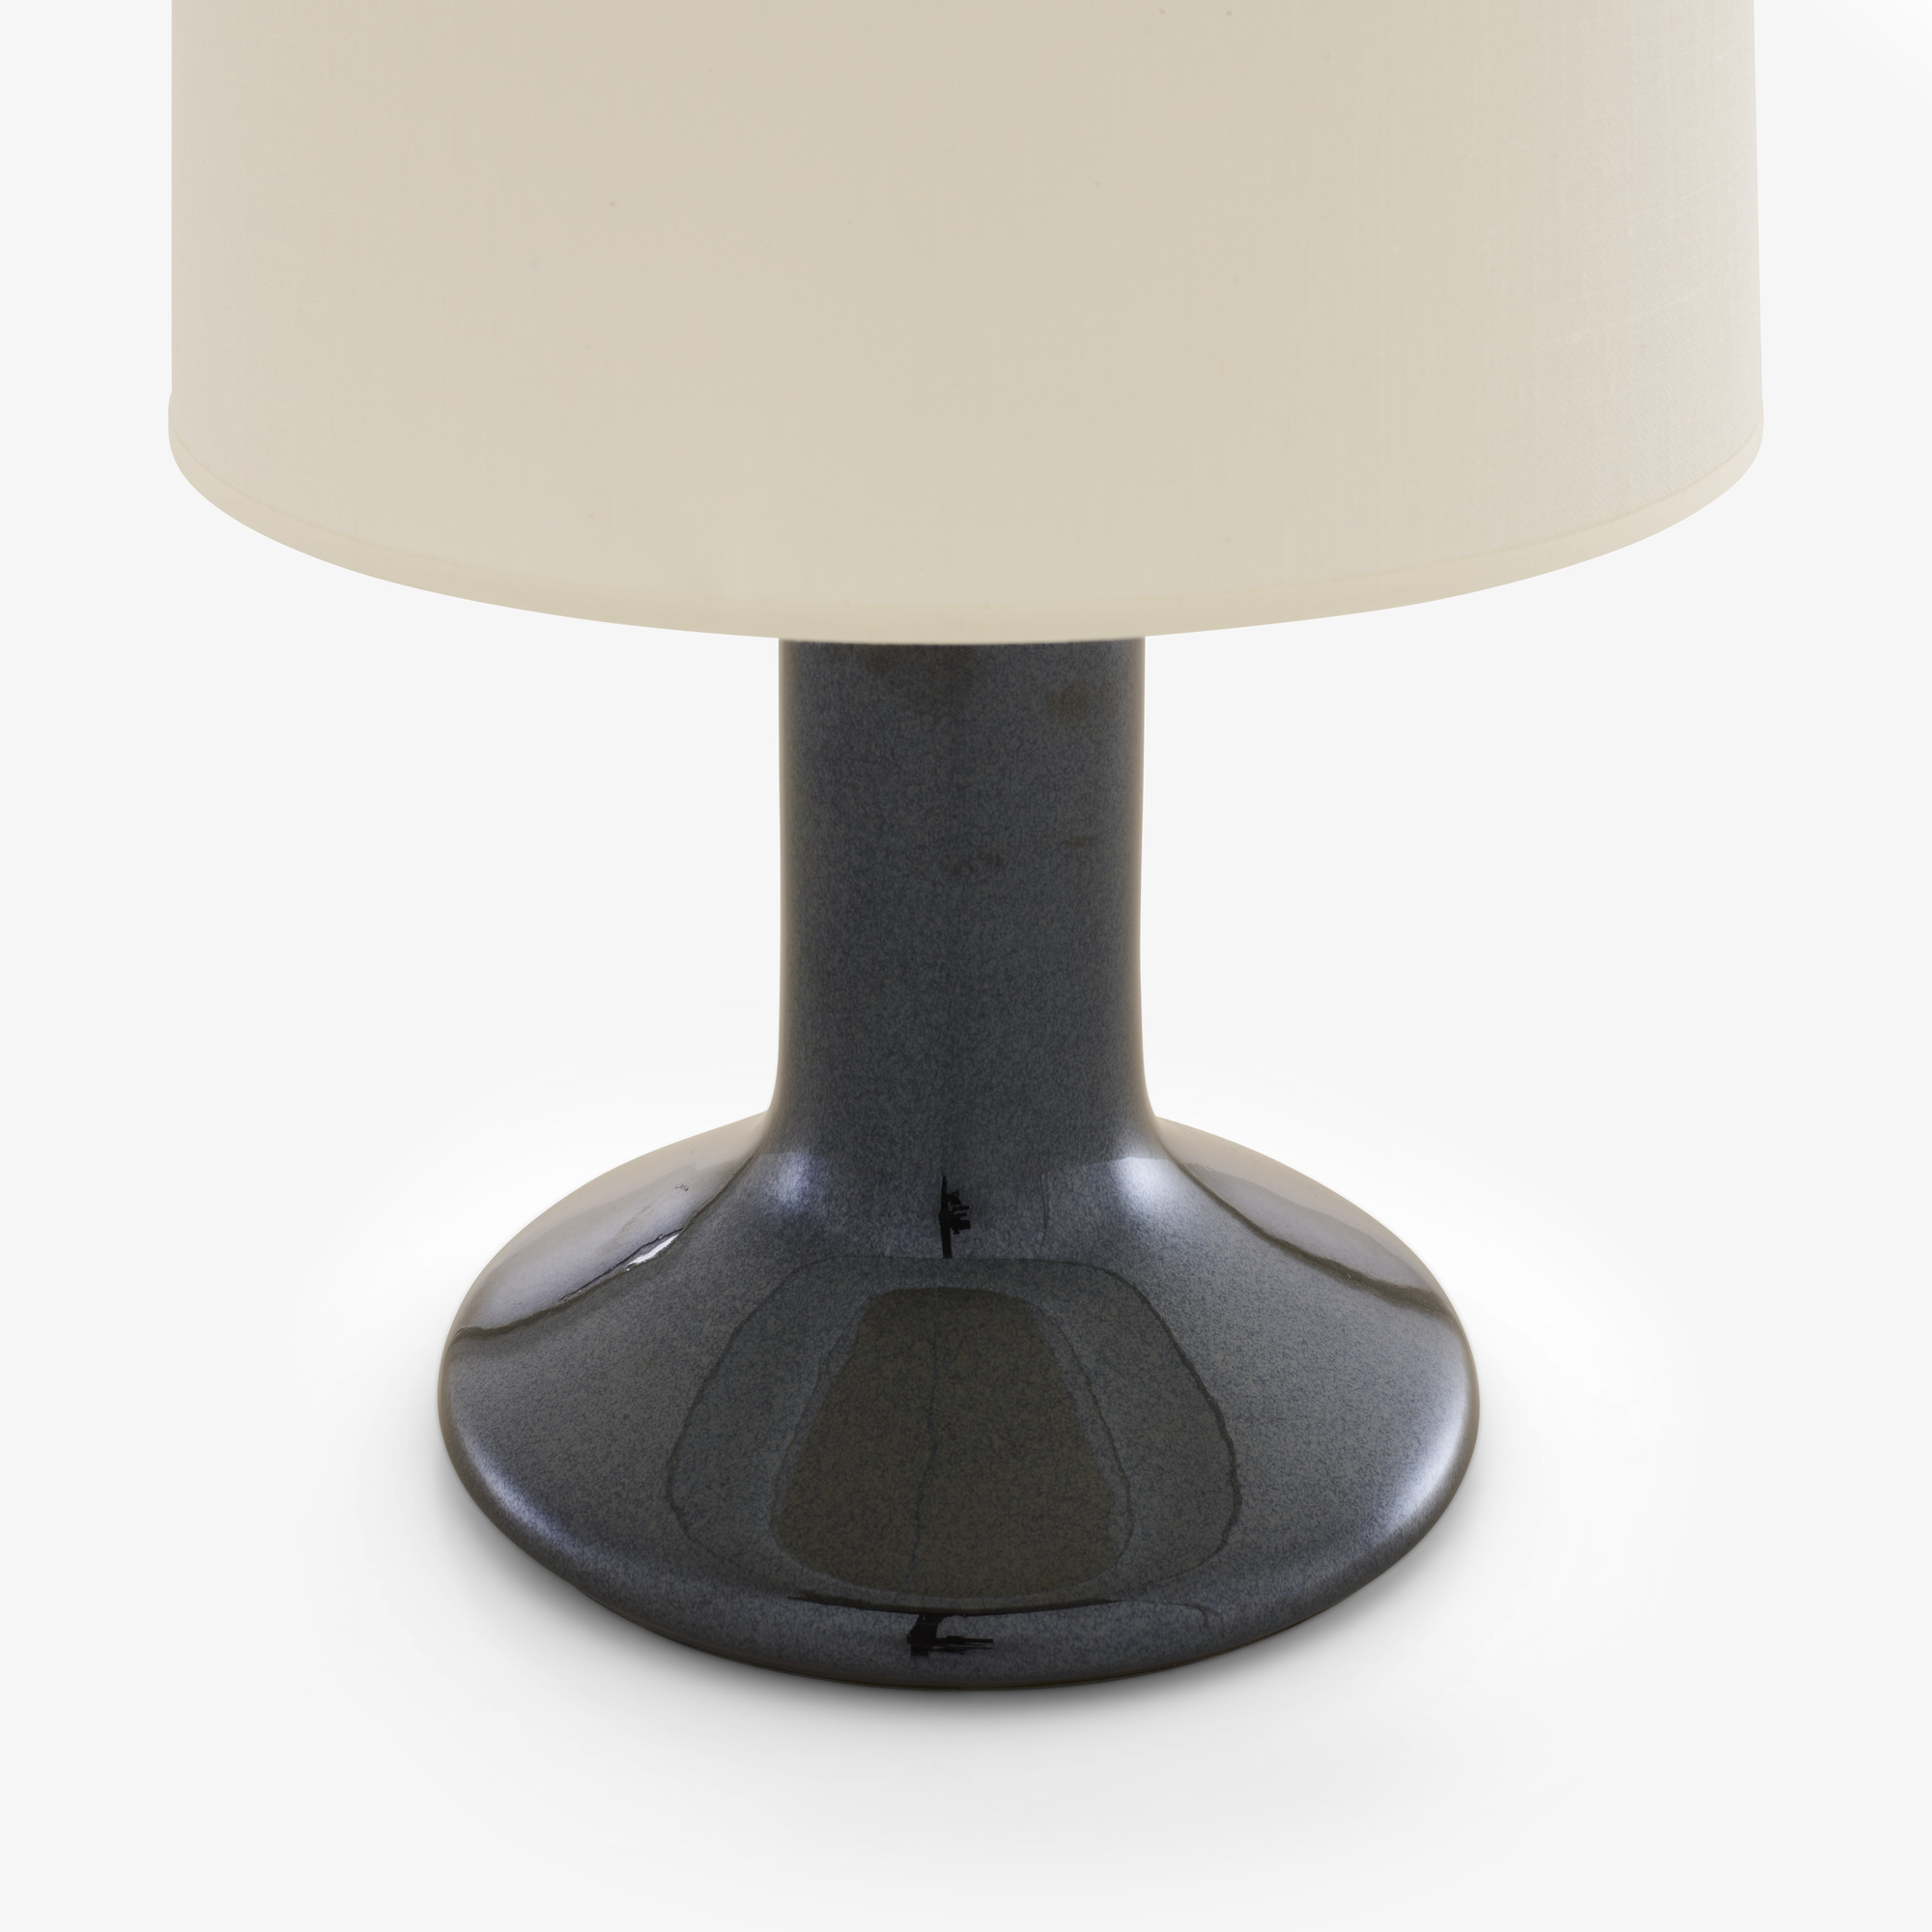 Image Table lamp   4